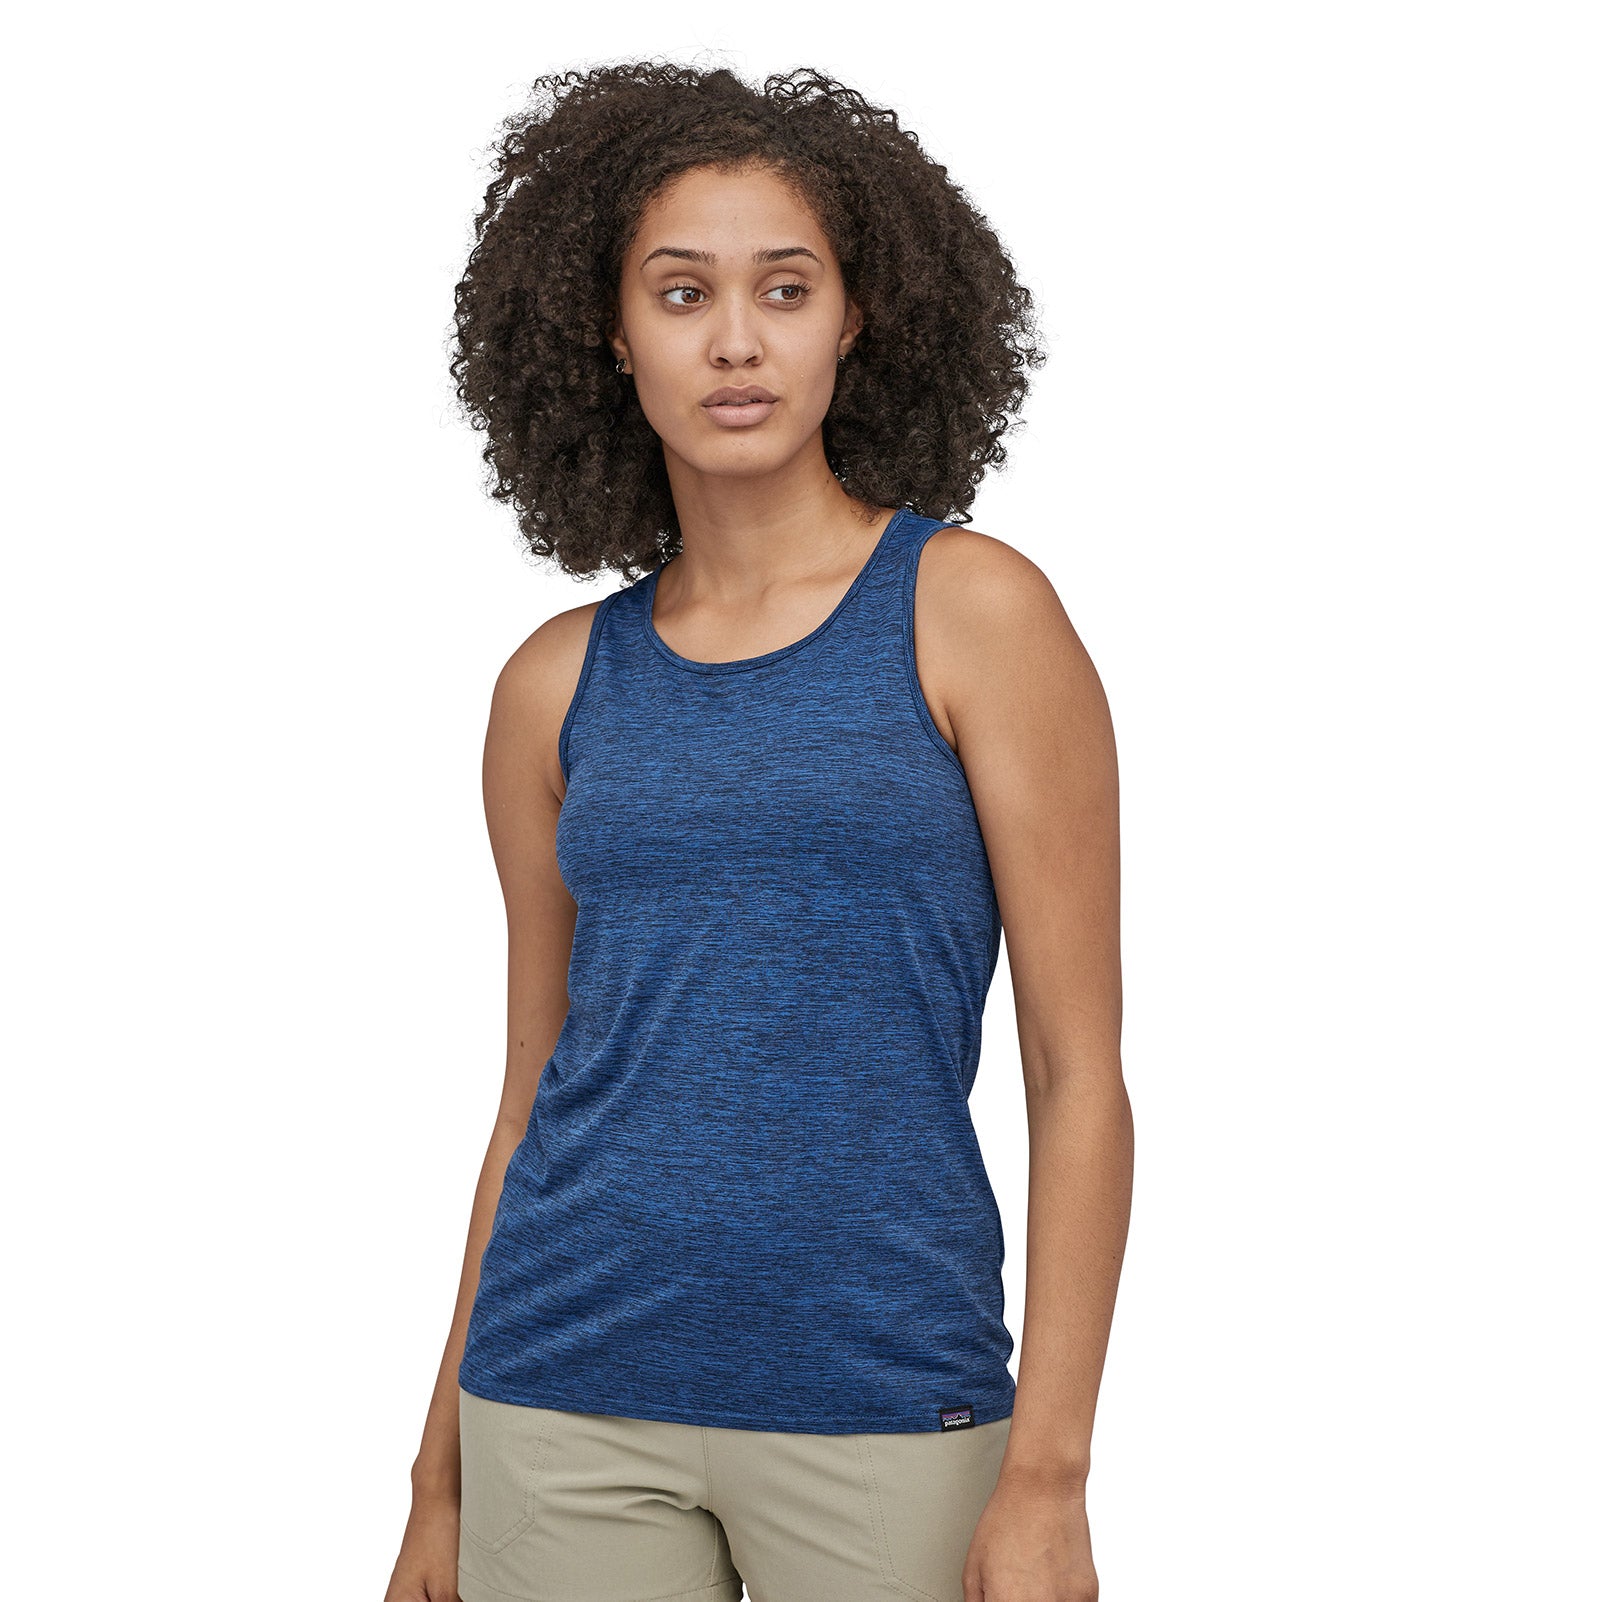 patagonia women's capilene cool daily tank in viking blue - navy blue x dye on a model, front view